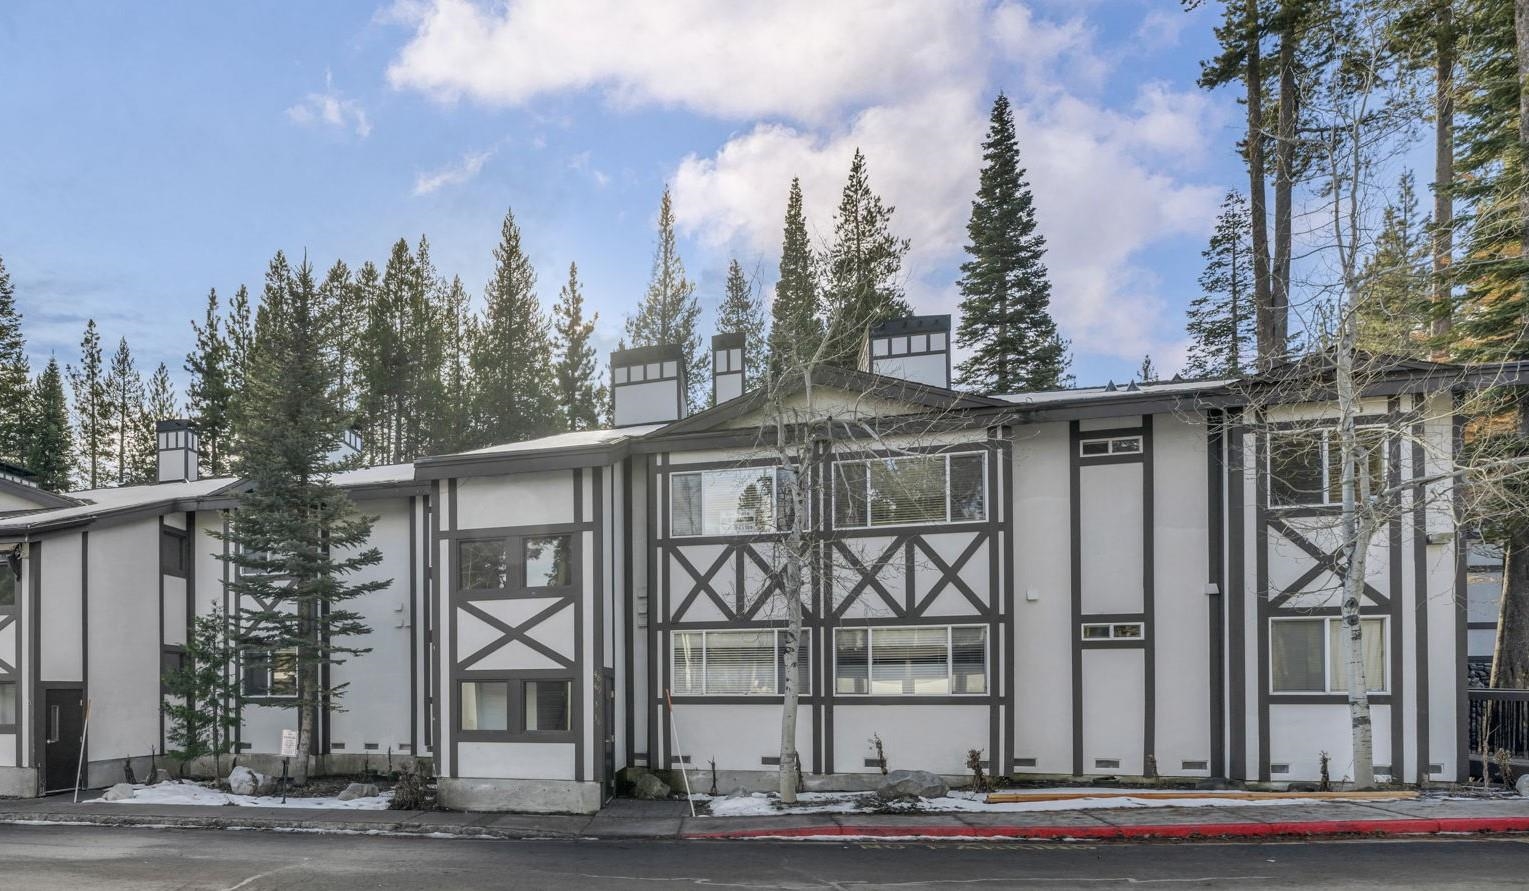 Image for 227 Olympic Valley Road, Squaw Valley, CA 96146